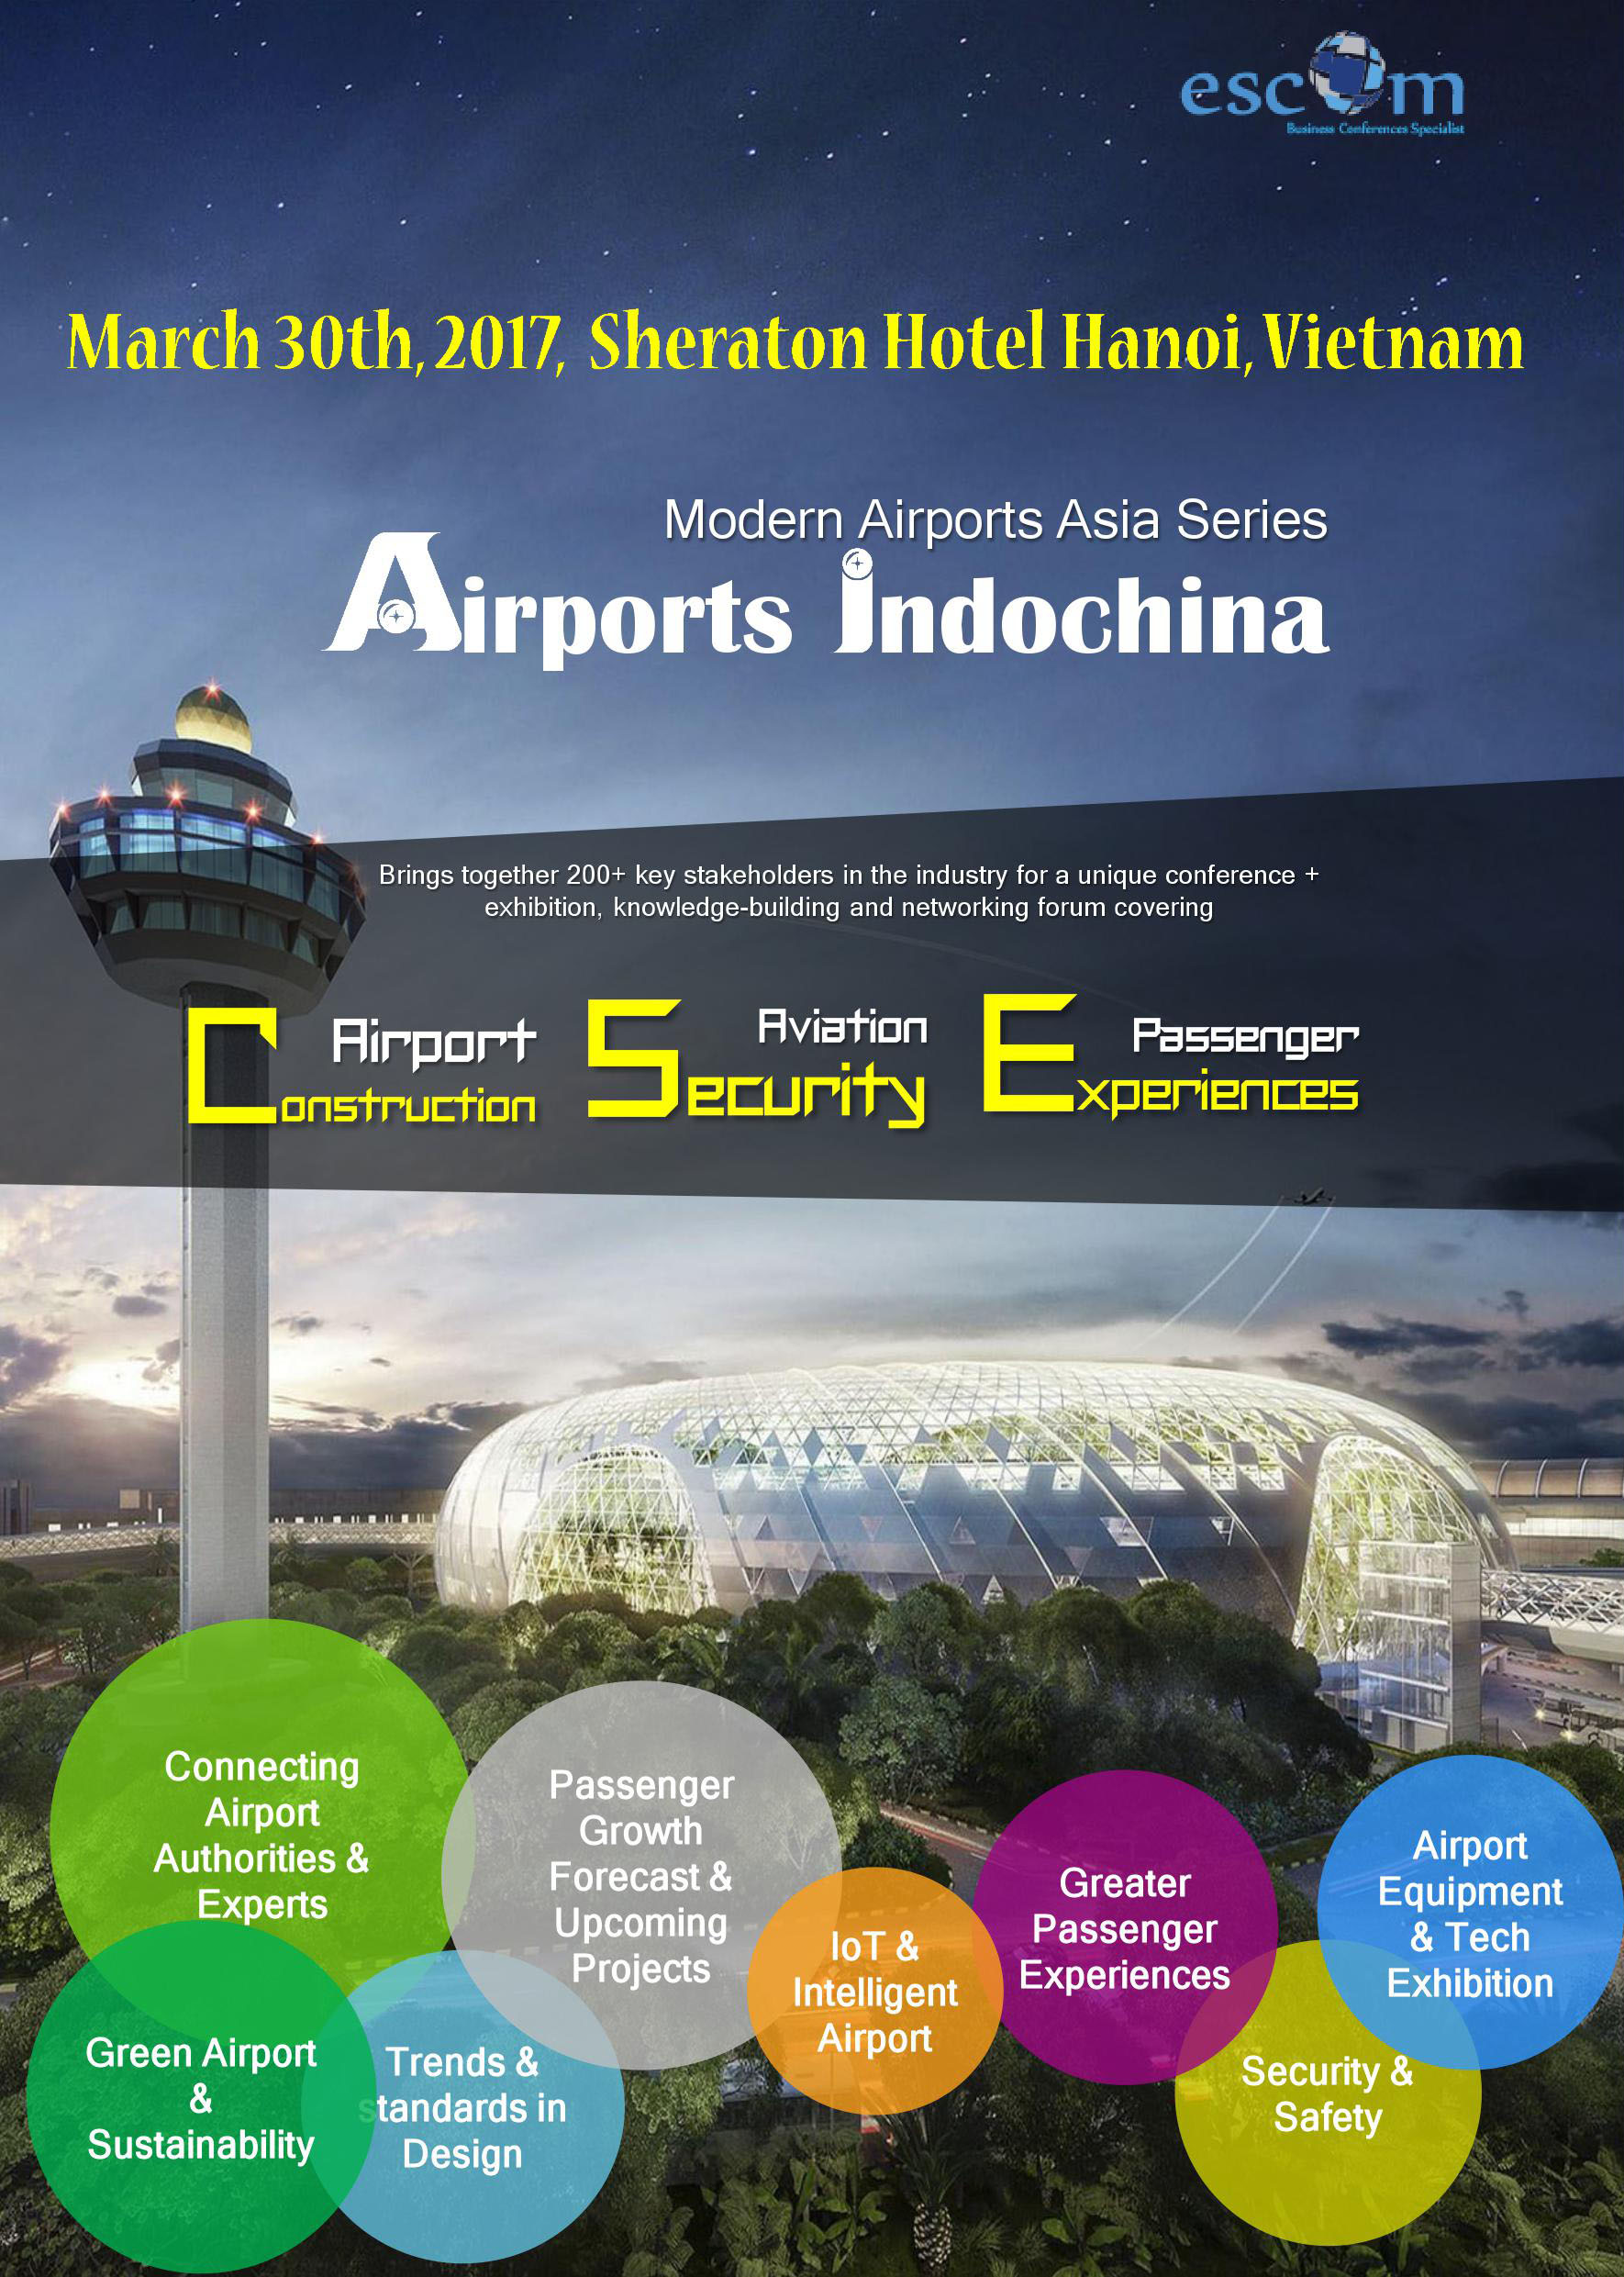 [30/03/17 HN] Modern Airports Asia Series: Airports Indochina